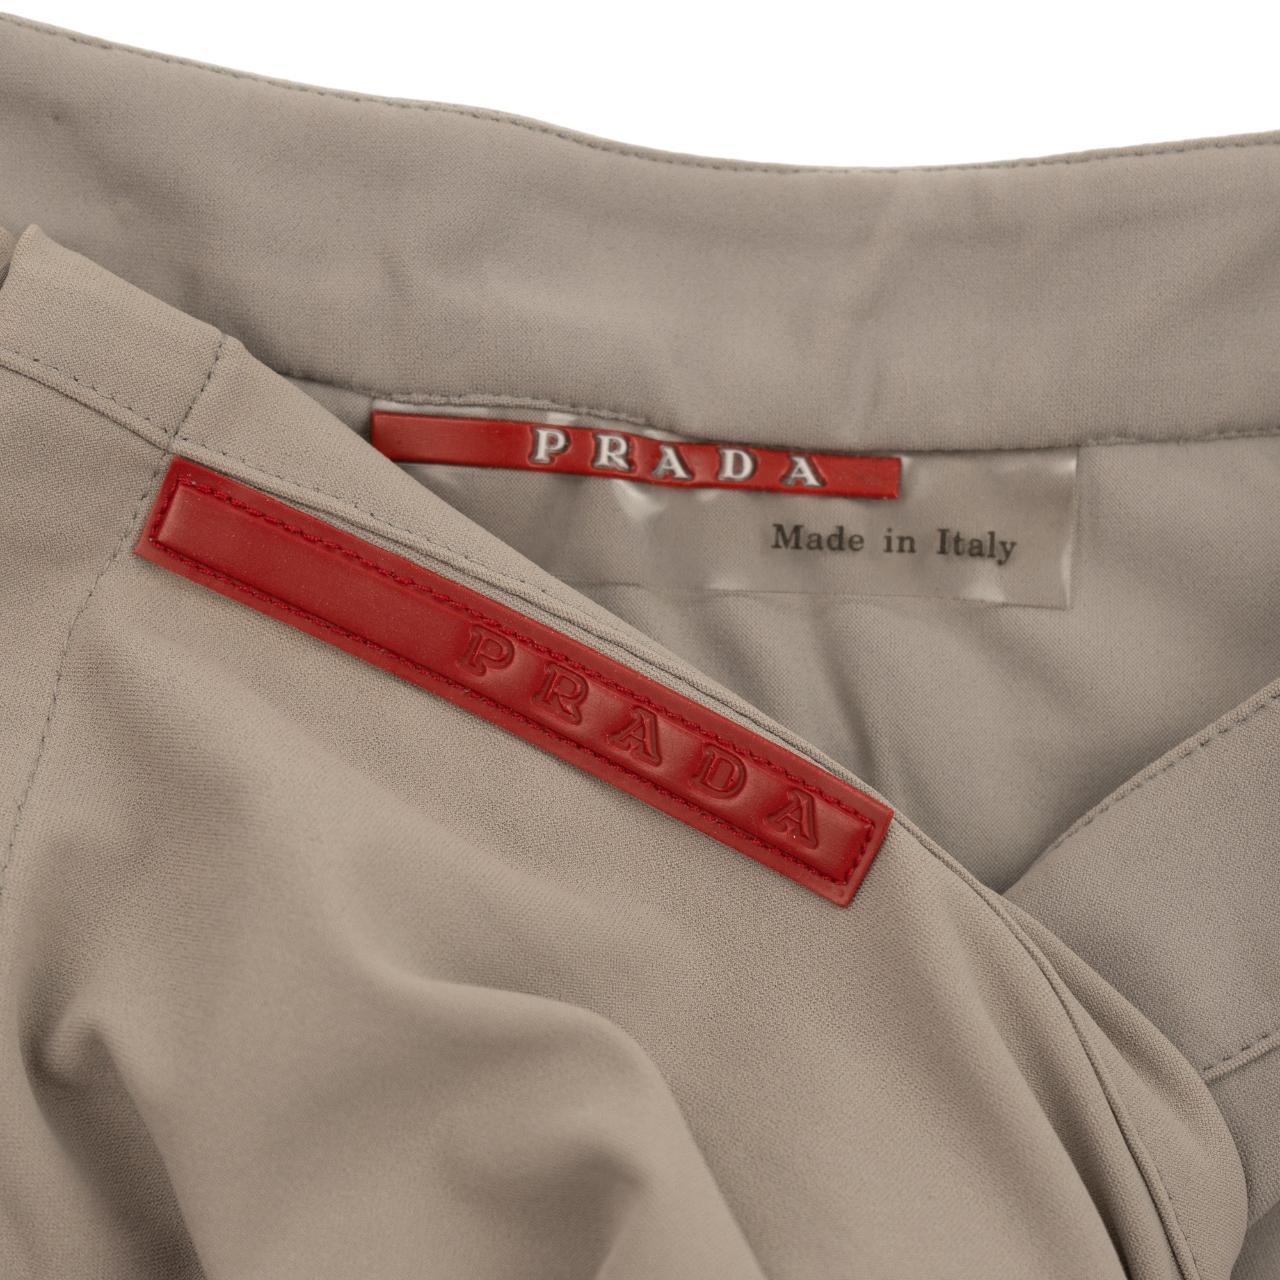 Vintage Prada Sport Trousers Womens Size M - Known Source